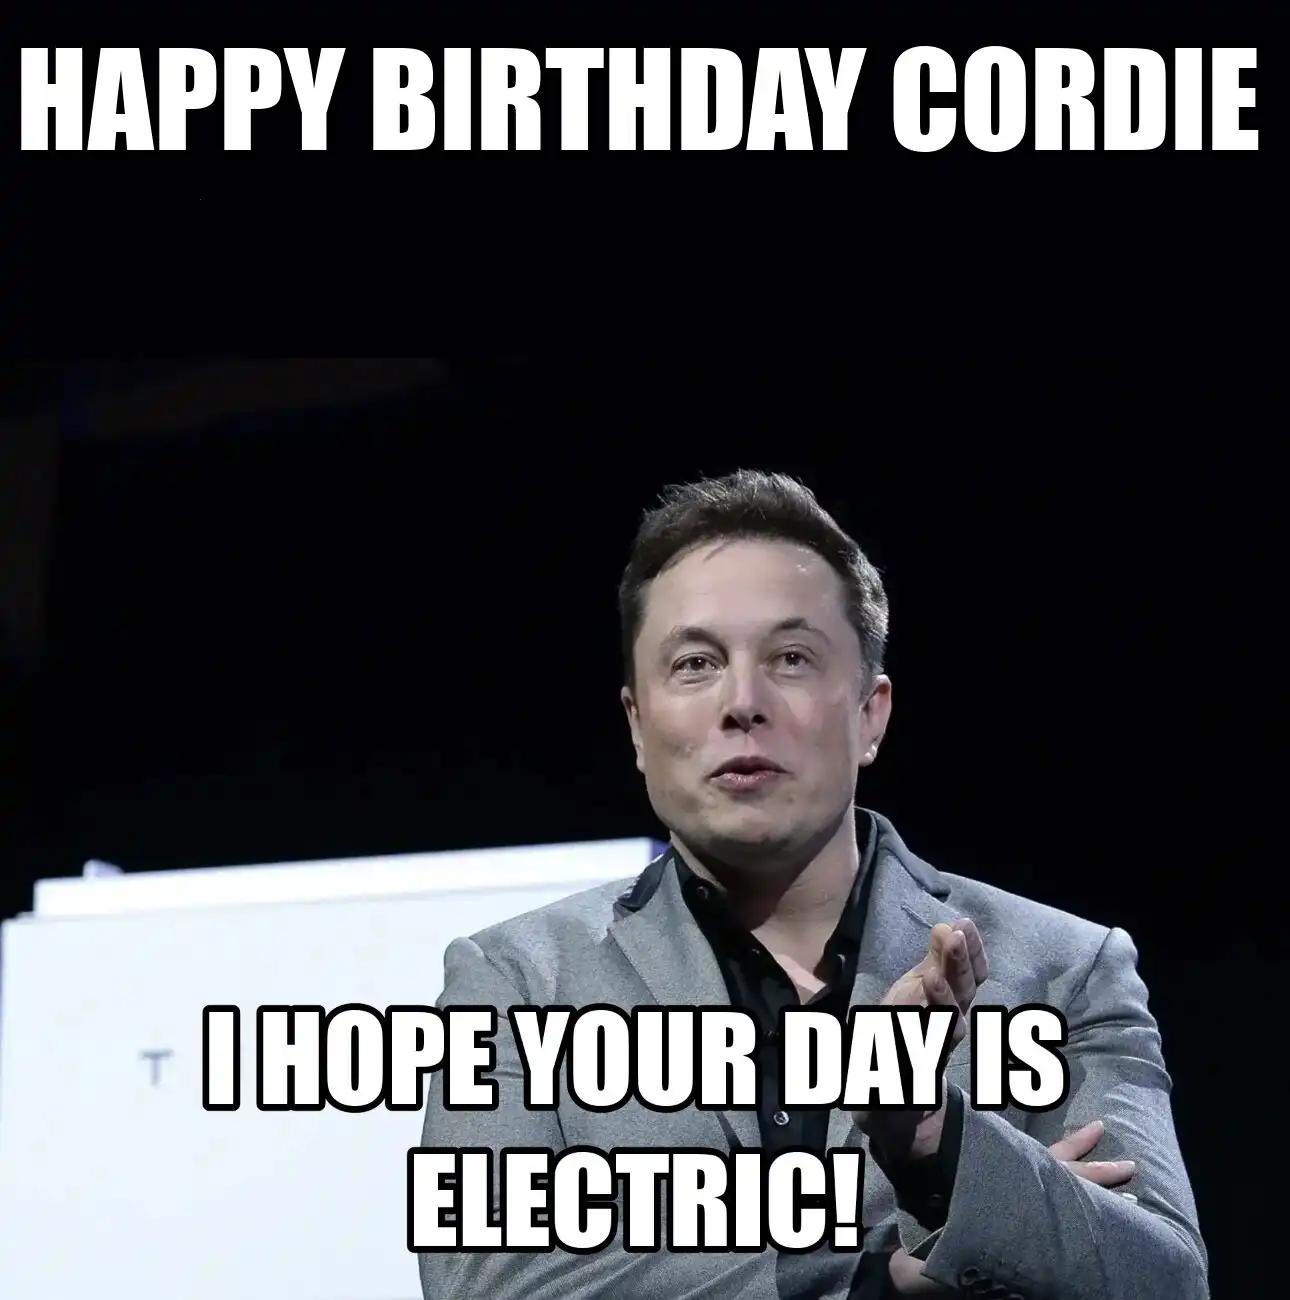 Happy Birthday Cordie I Hope Your Day Is Electric Meme